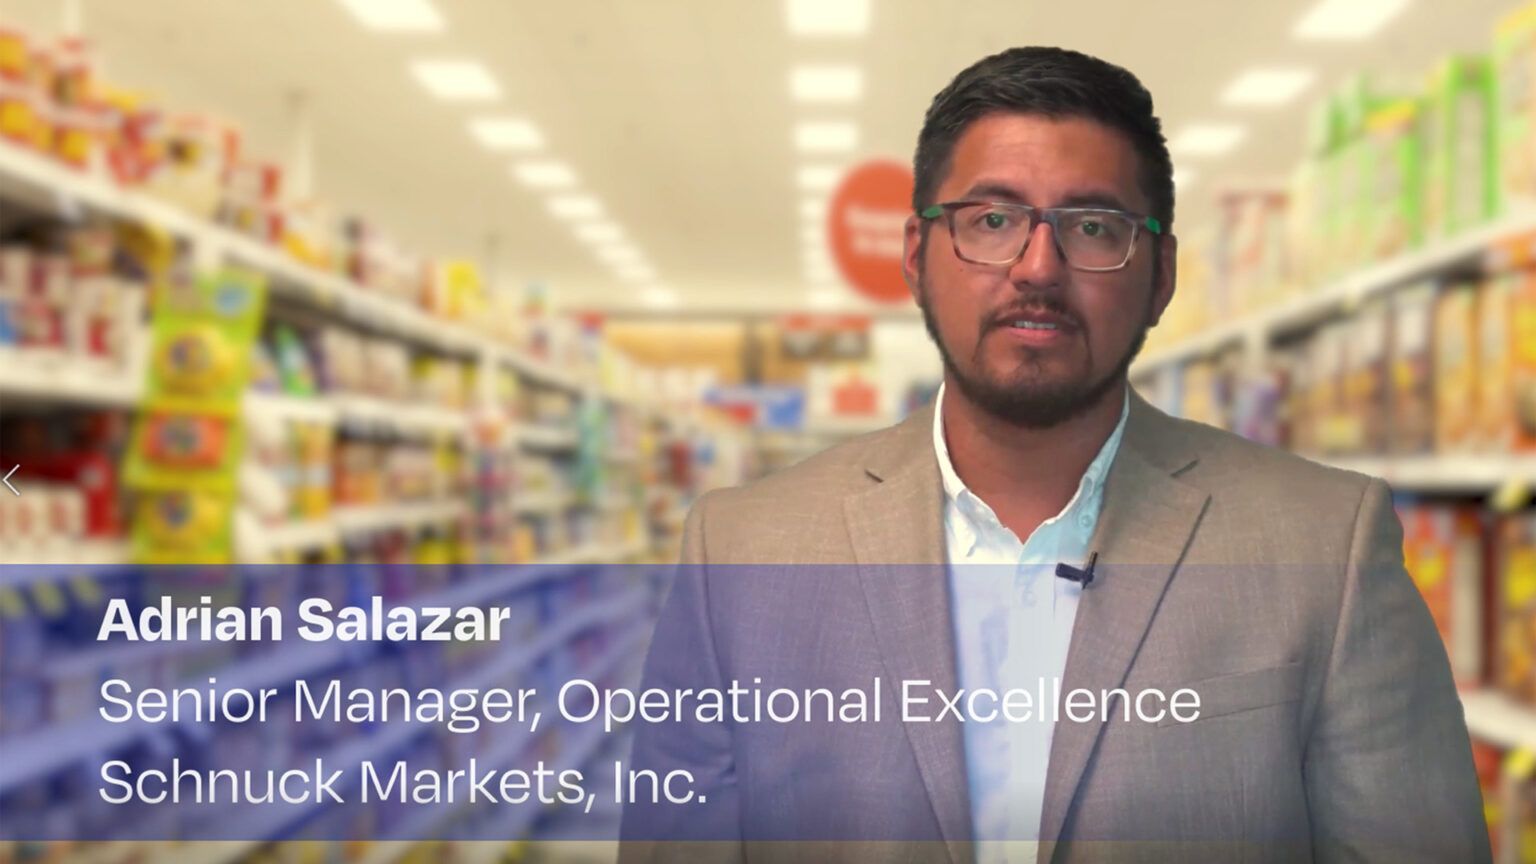 Schnucks sees high engagement with innovative flex scheduling and solutions addressing their scheduling, time and attendance, and task management needs